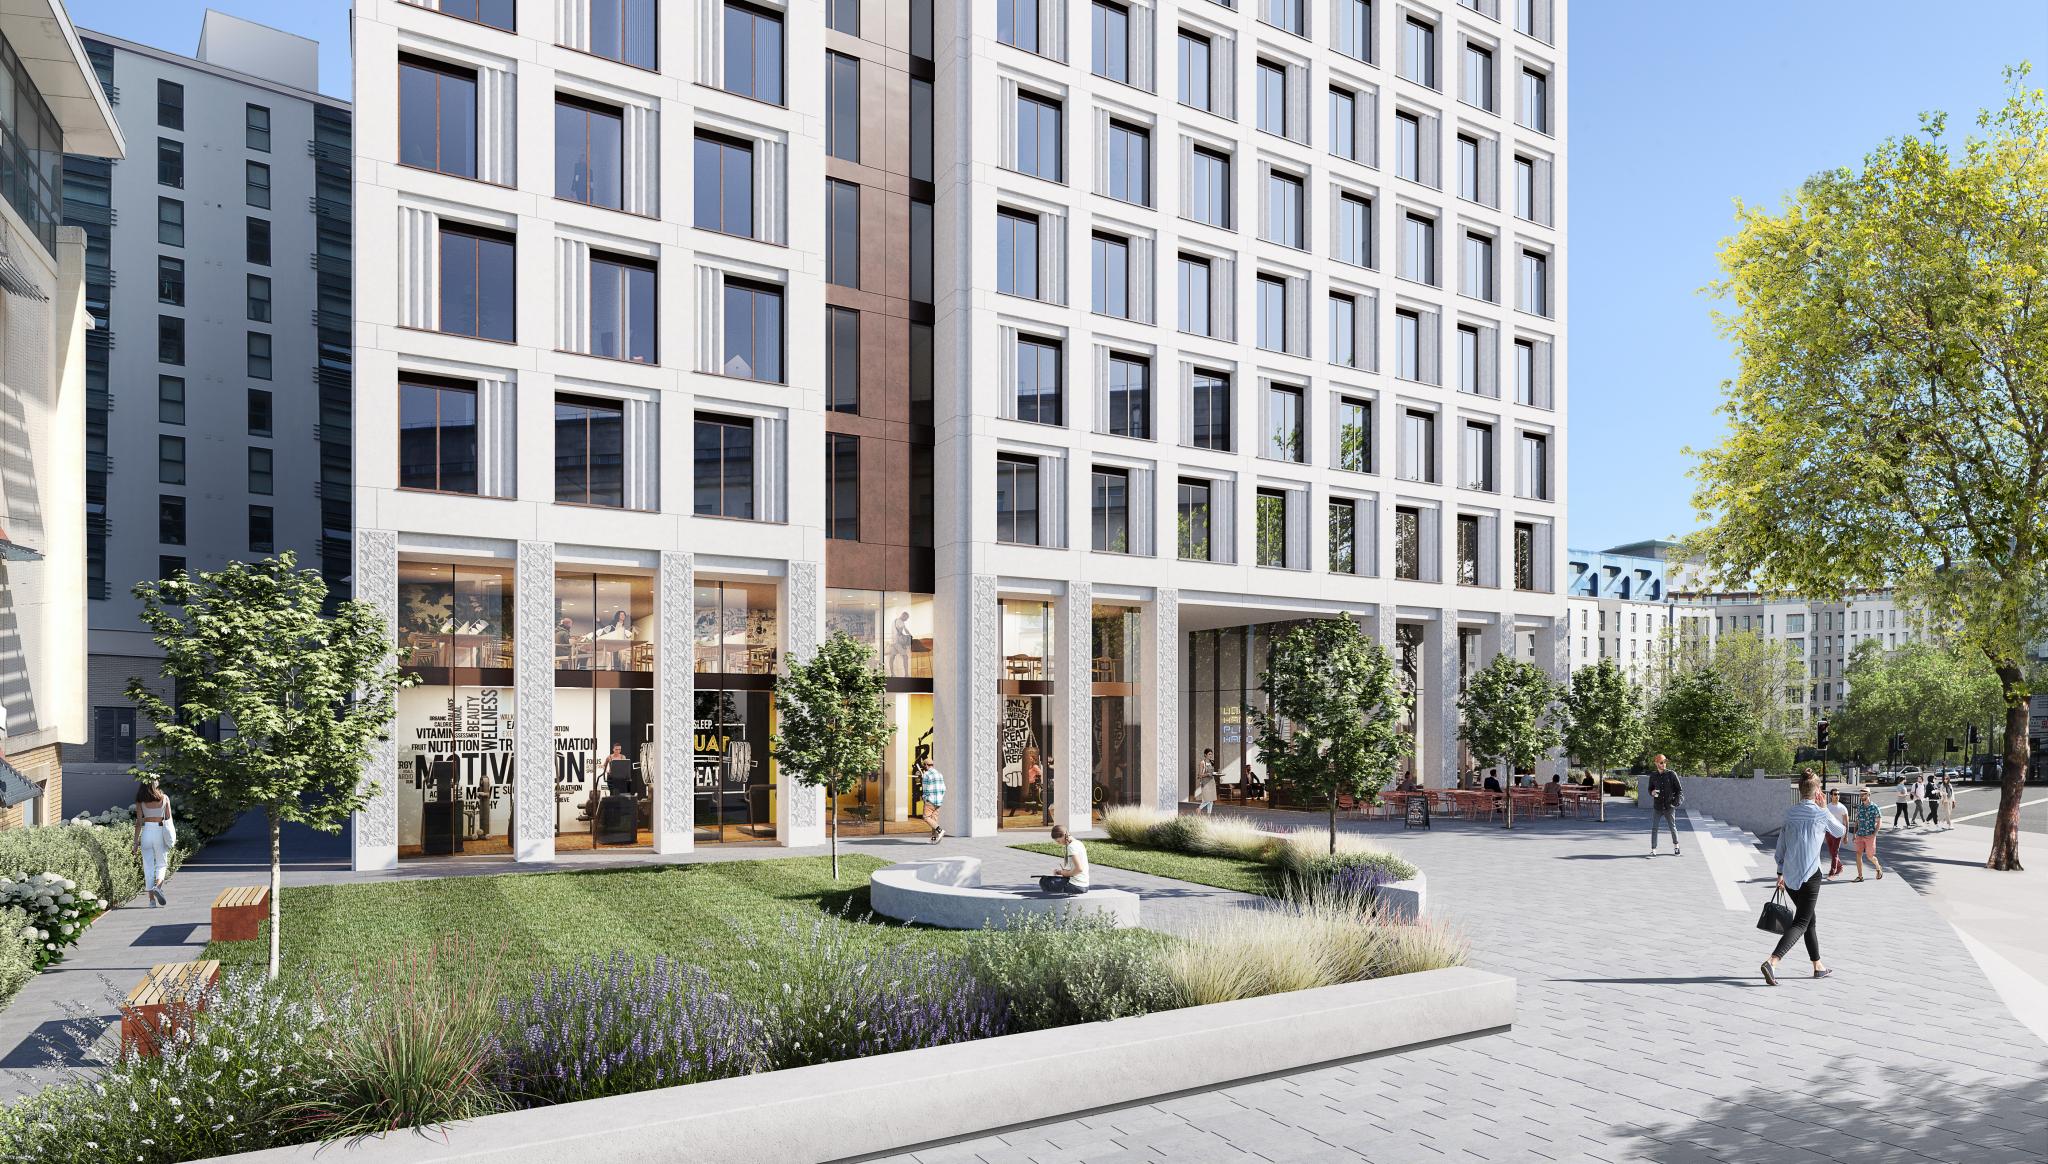 Planning approval granted for Bristol's tallest building